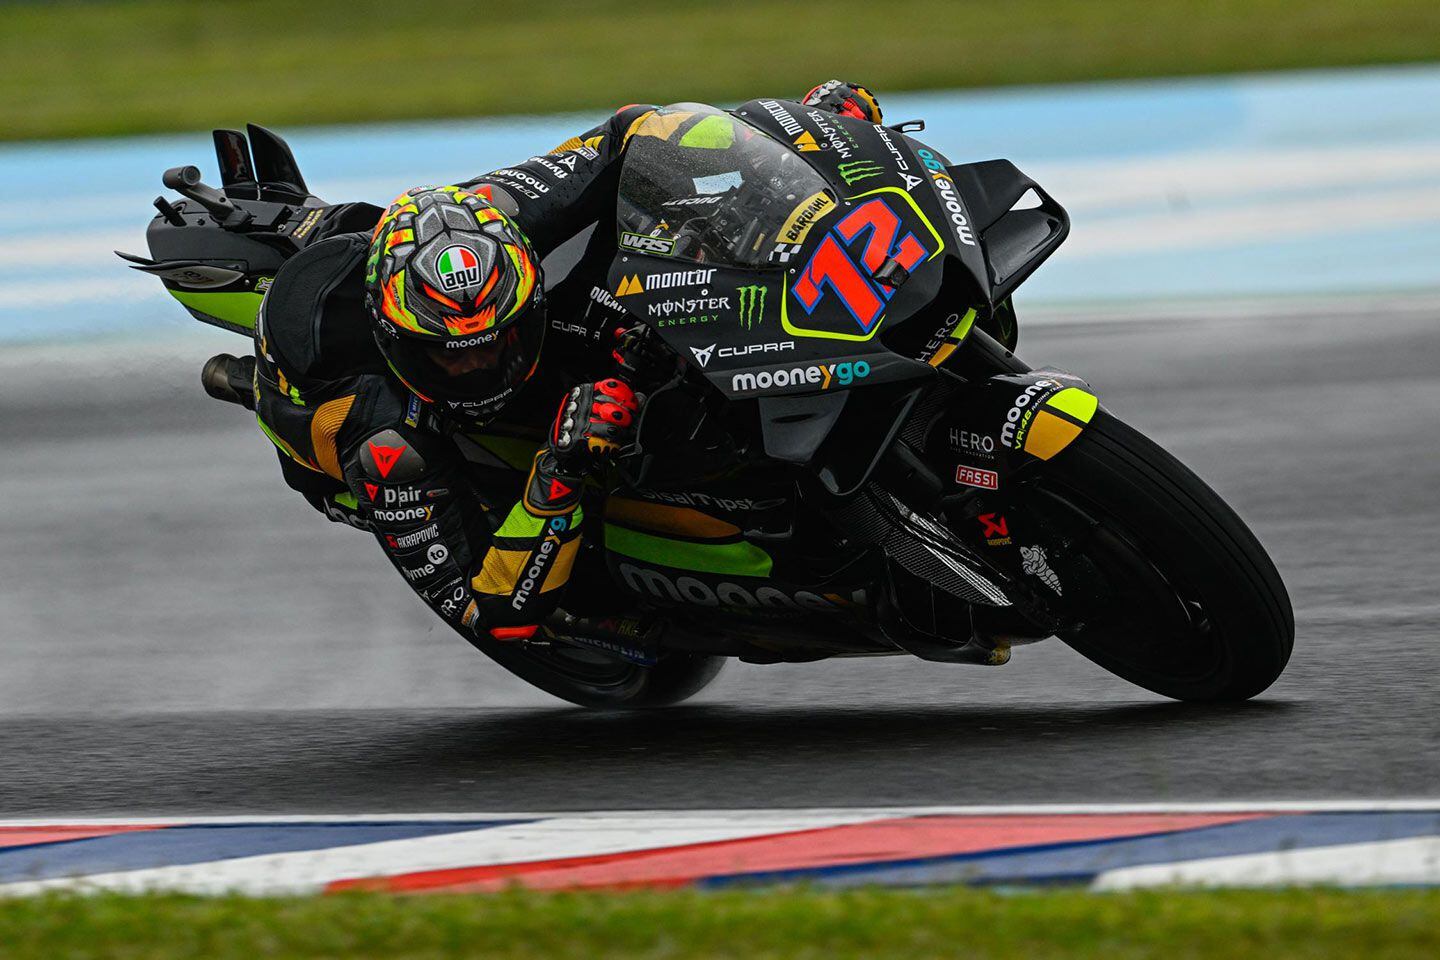 Marco Bezzecch gave Mooney VR46 it’s first-ever MotoGP victory, along with his first premier class win.